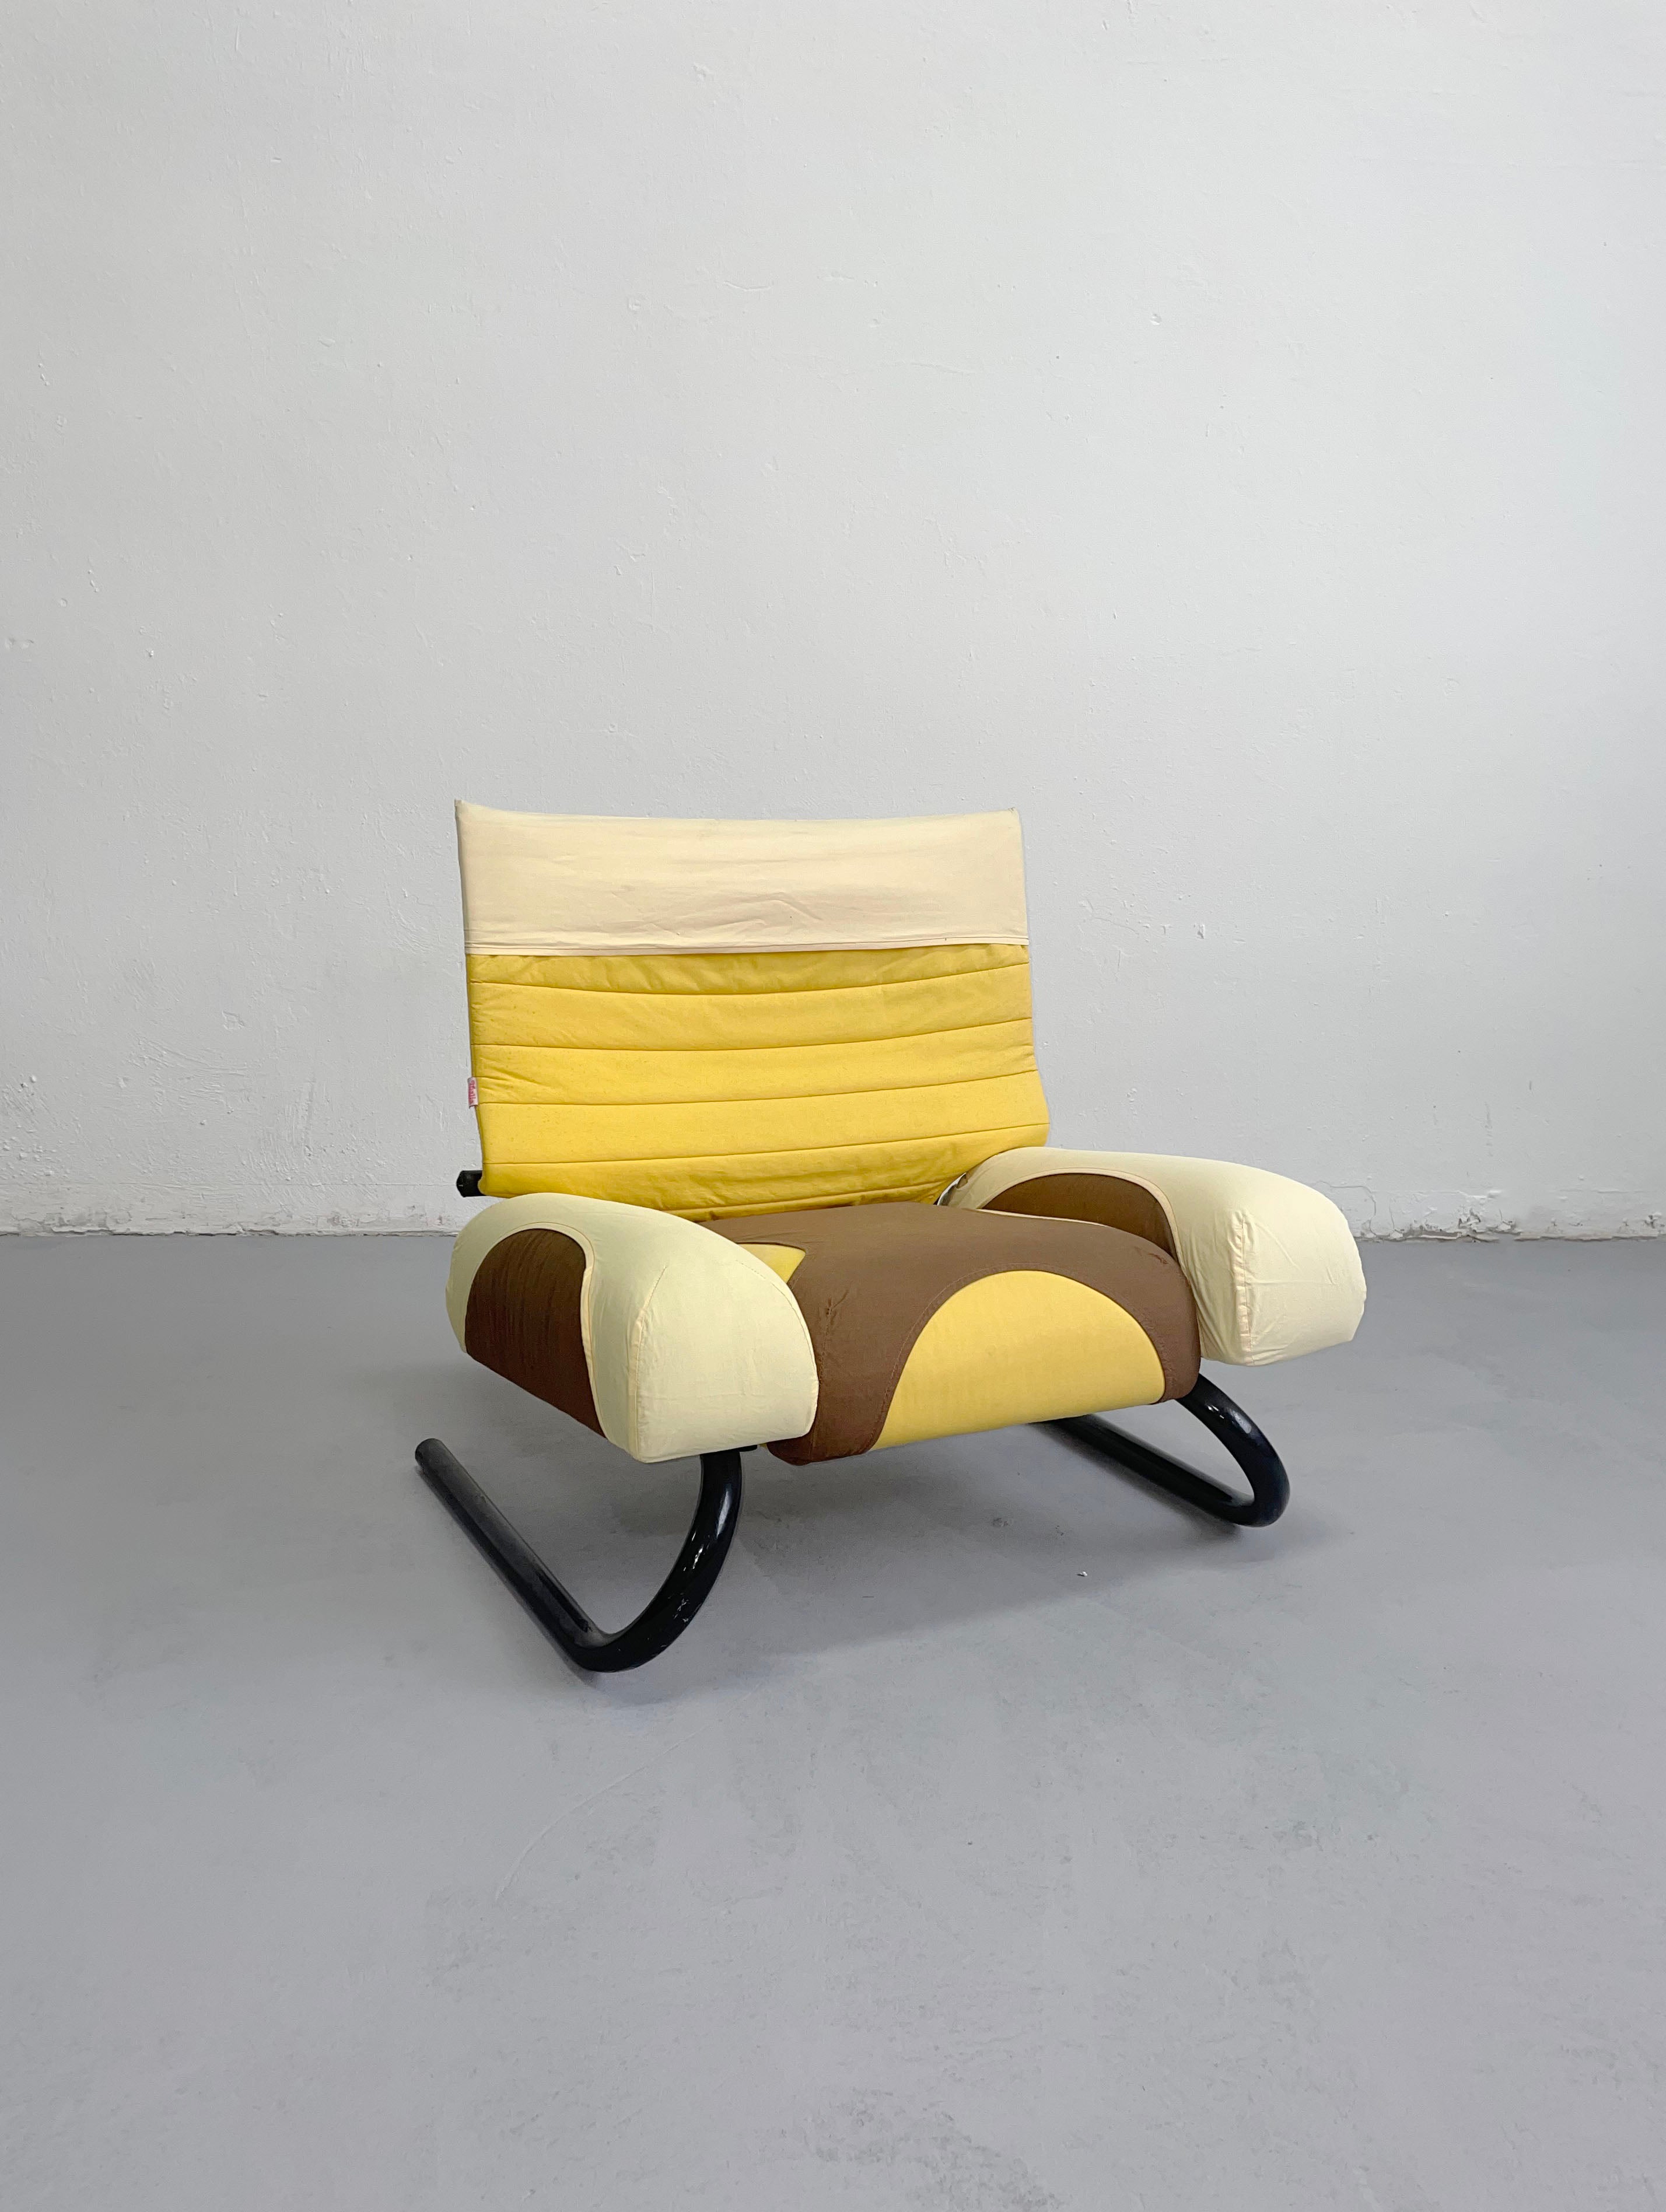 The very rare lounge chair 'Peter Pan' was designed by the influential Italian architect and designer Michele de Lucchi in 1982 for Thalia & Co.

The chair is a nice example of radical postmodern Italian design by Michele de Lucchi who was a member